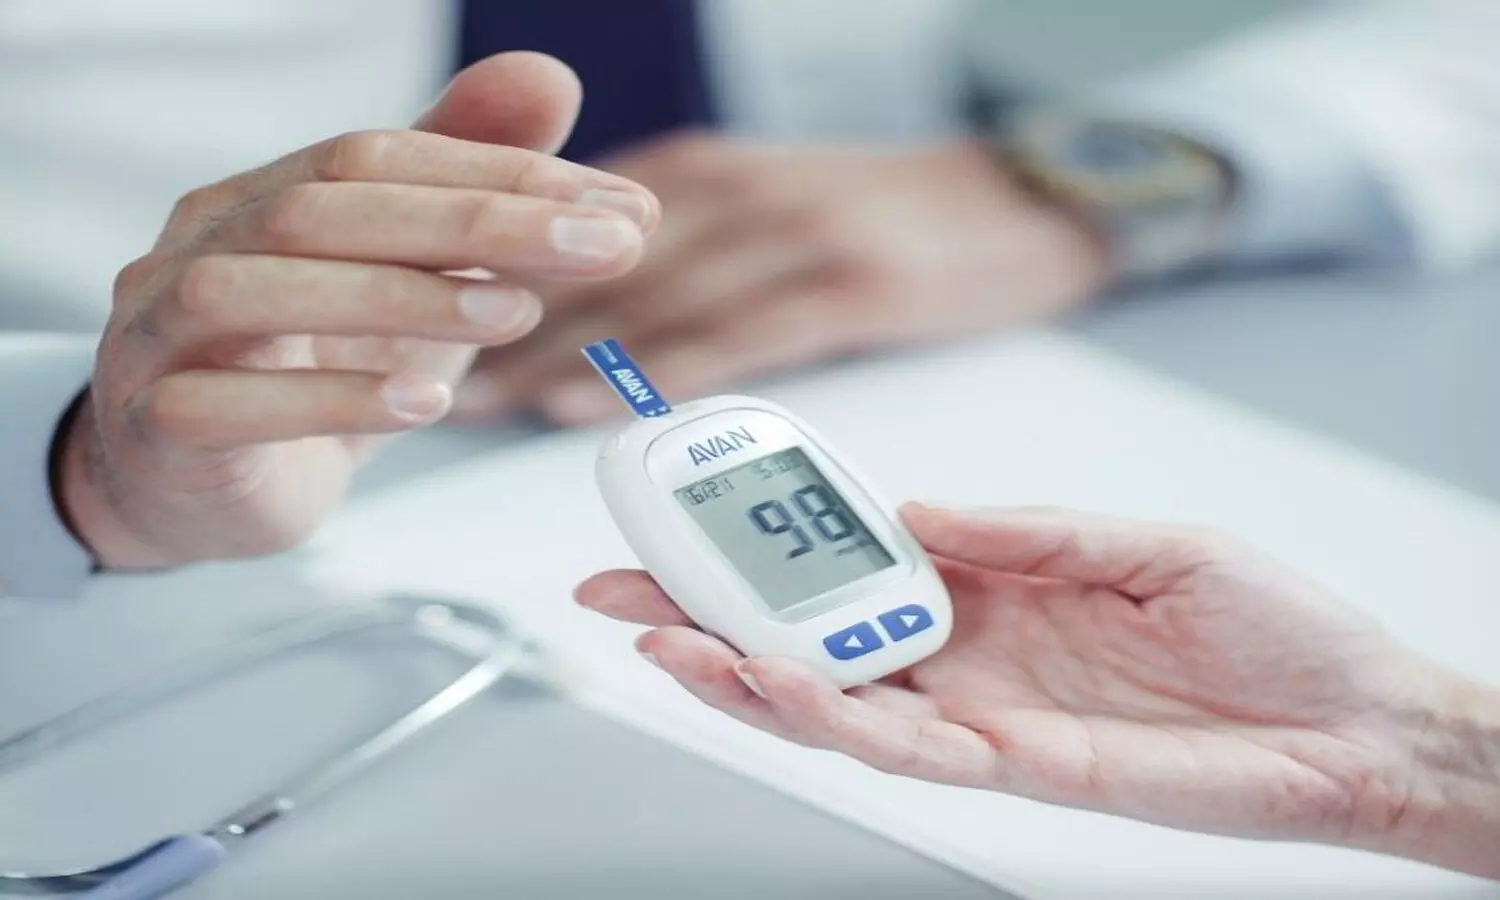 Suffering from Diabetes? 5 amazing foods to control your blood sugar levels